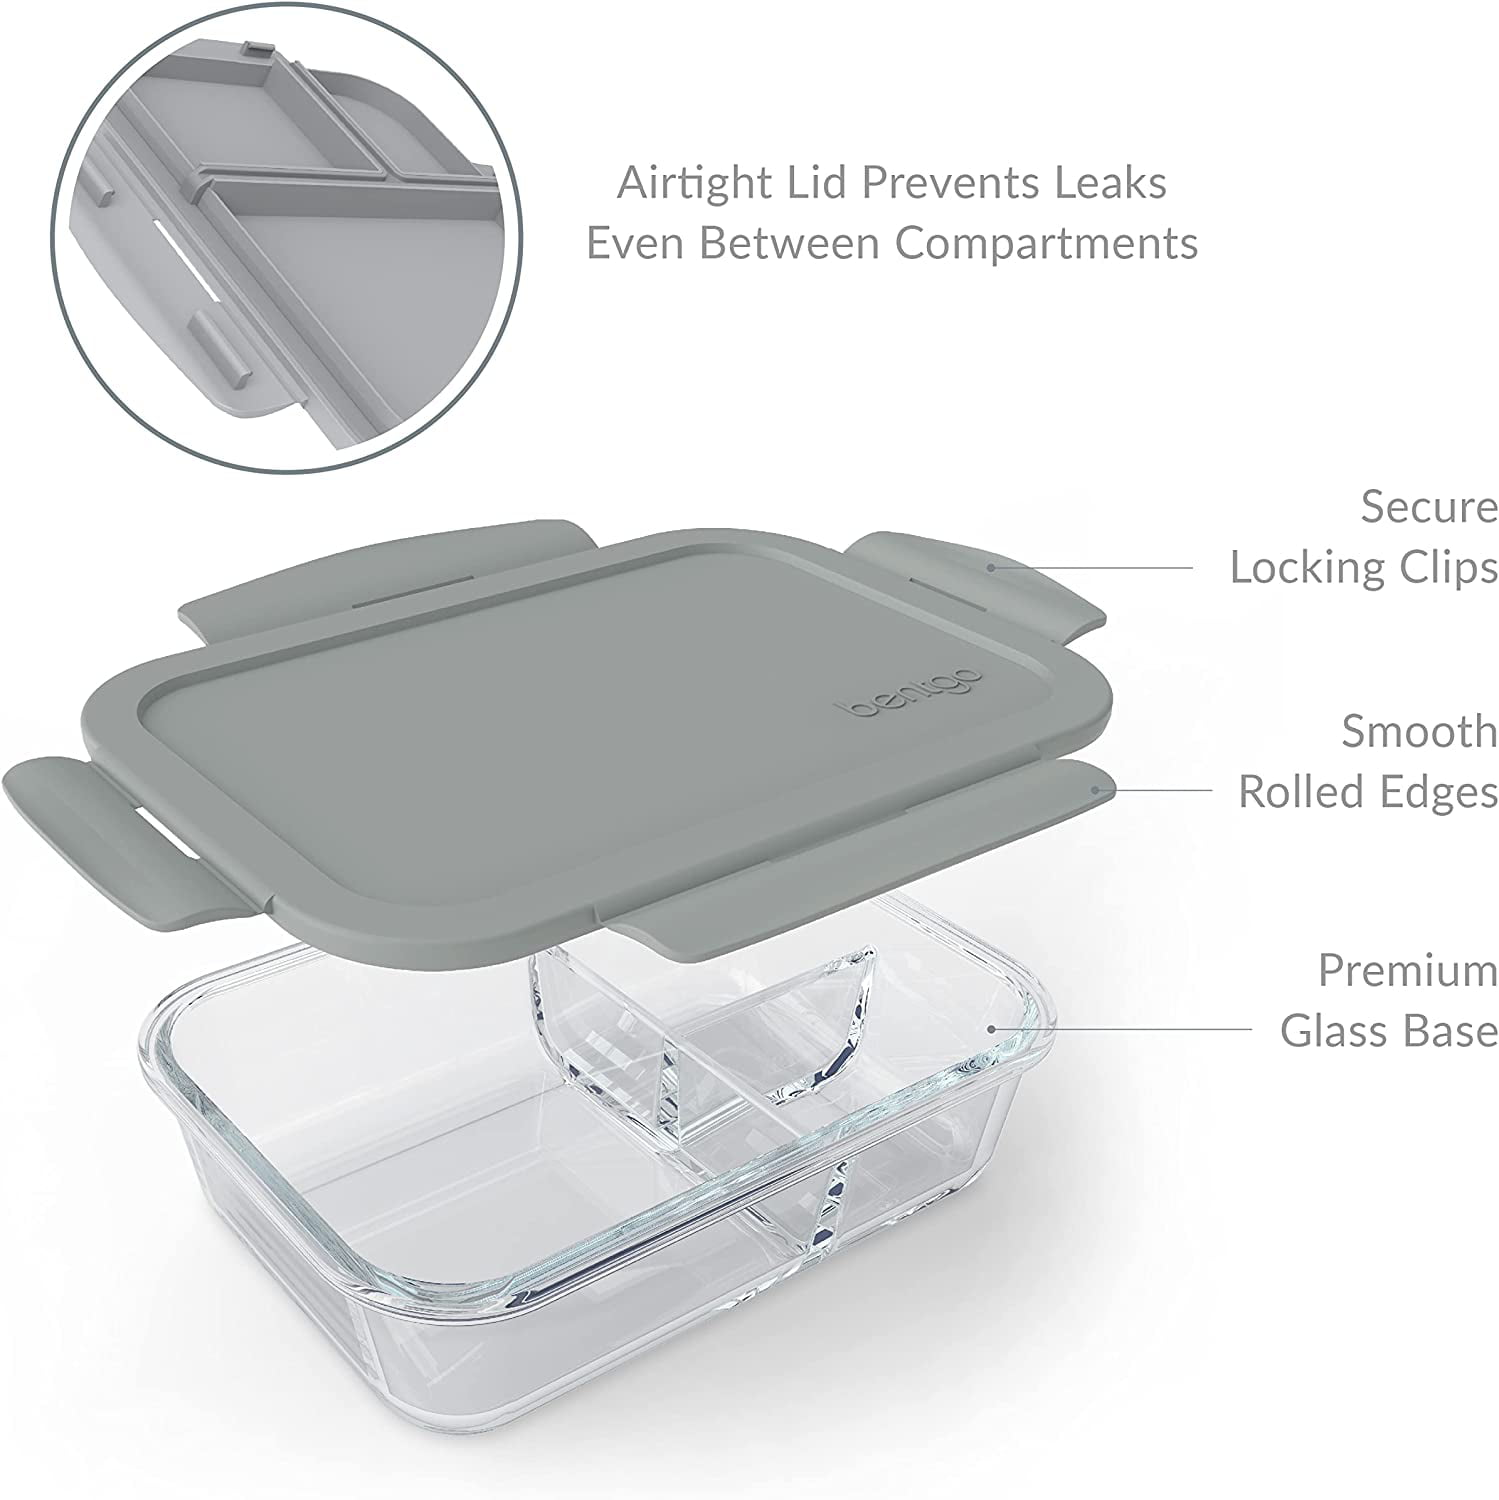 Bentgo Glass (Gray) – Leak-Proof, 3-Compartment Oven-Safe Glass